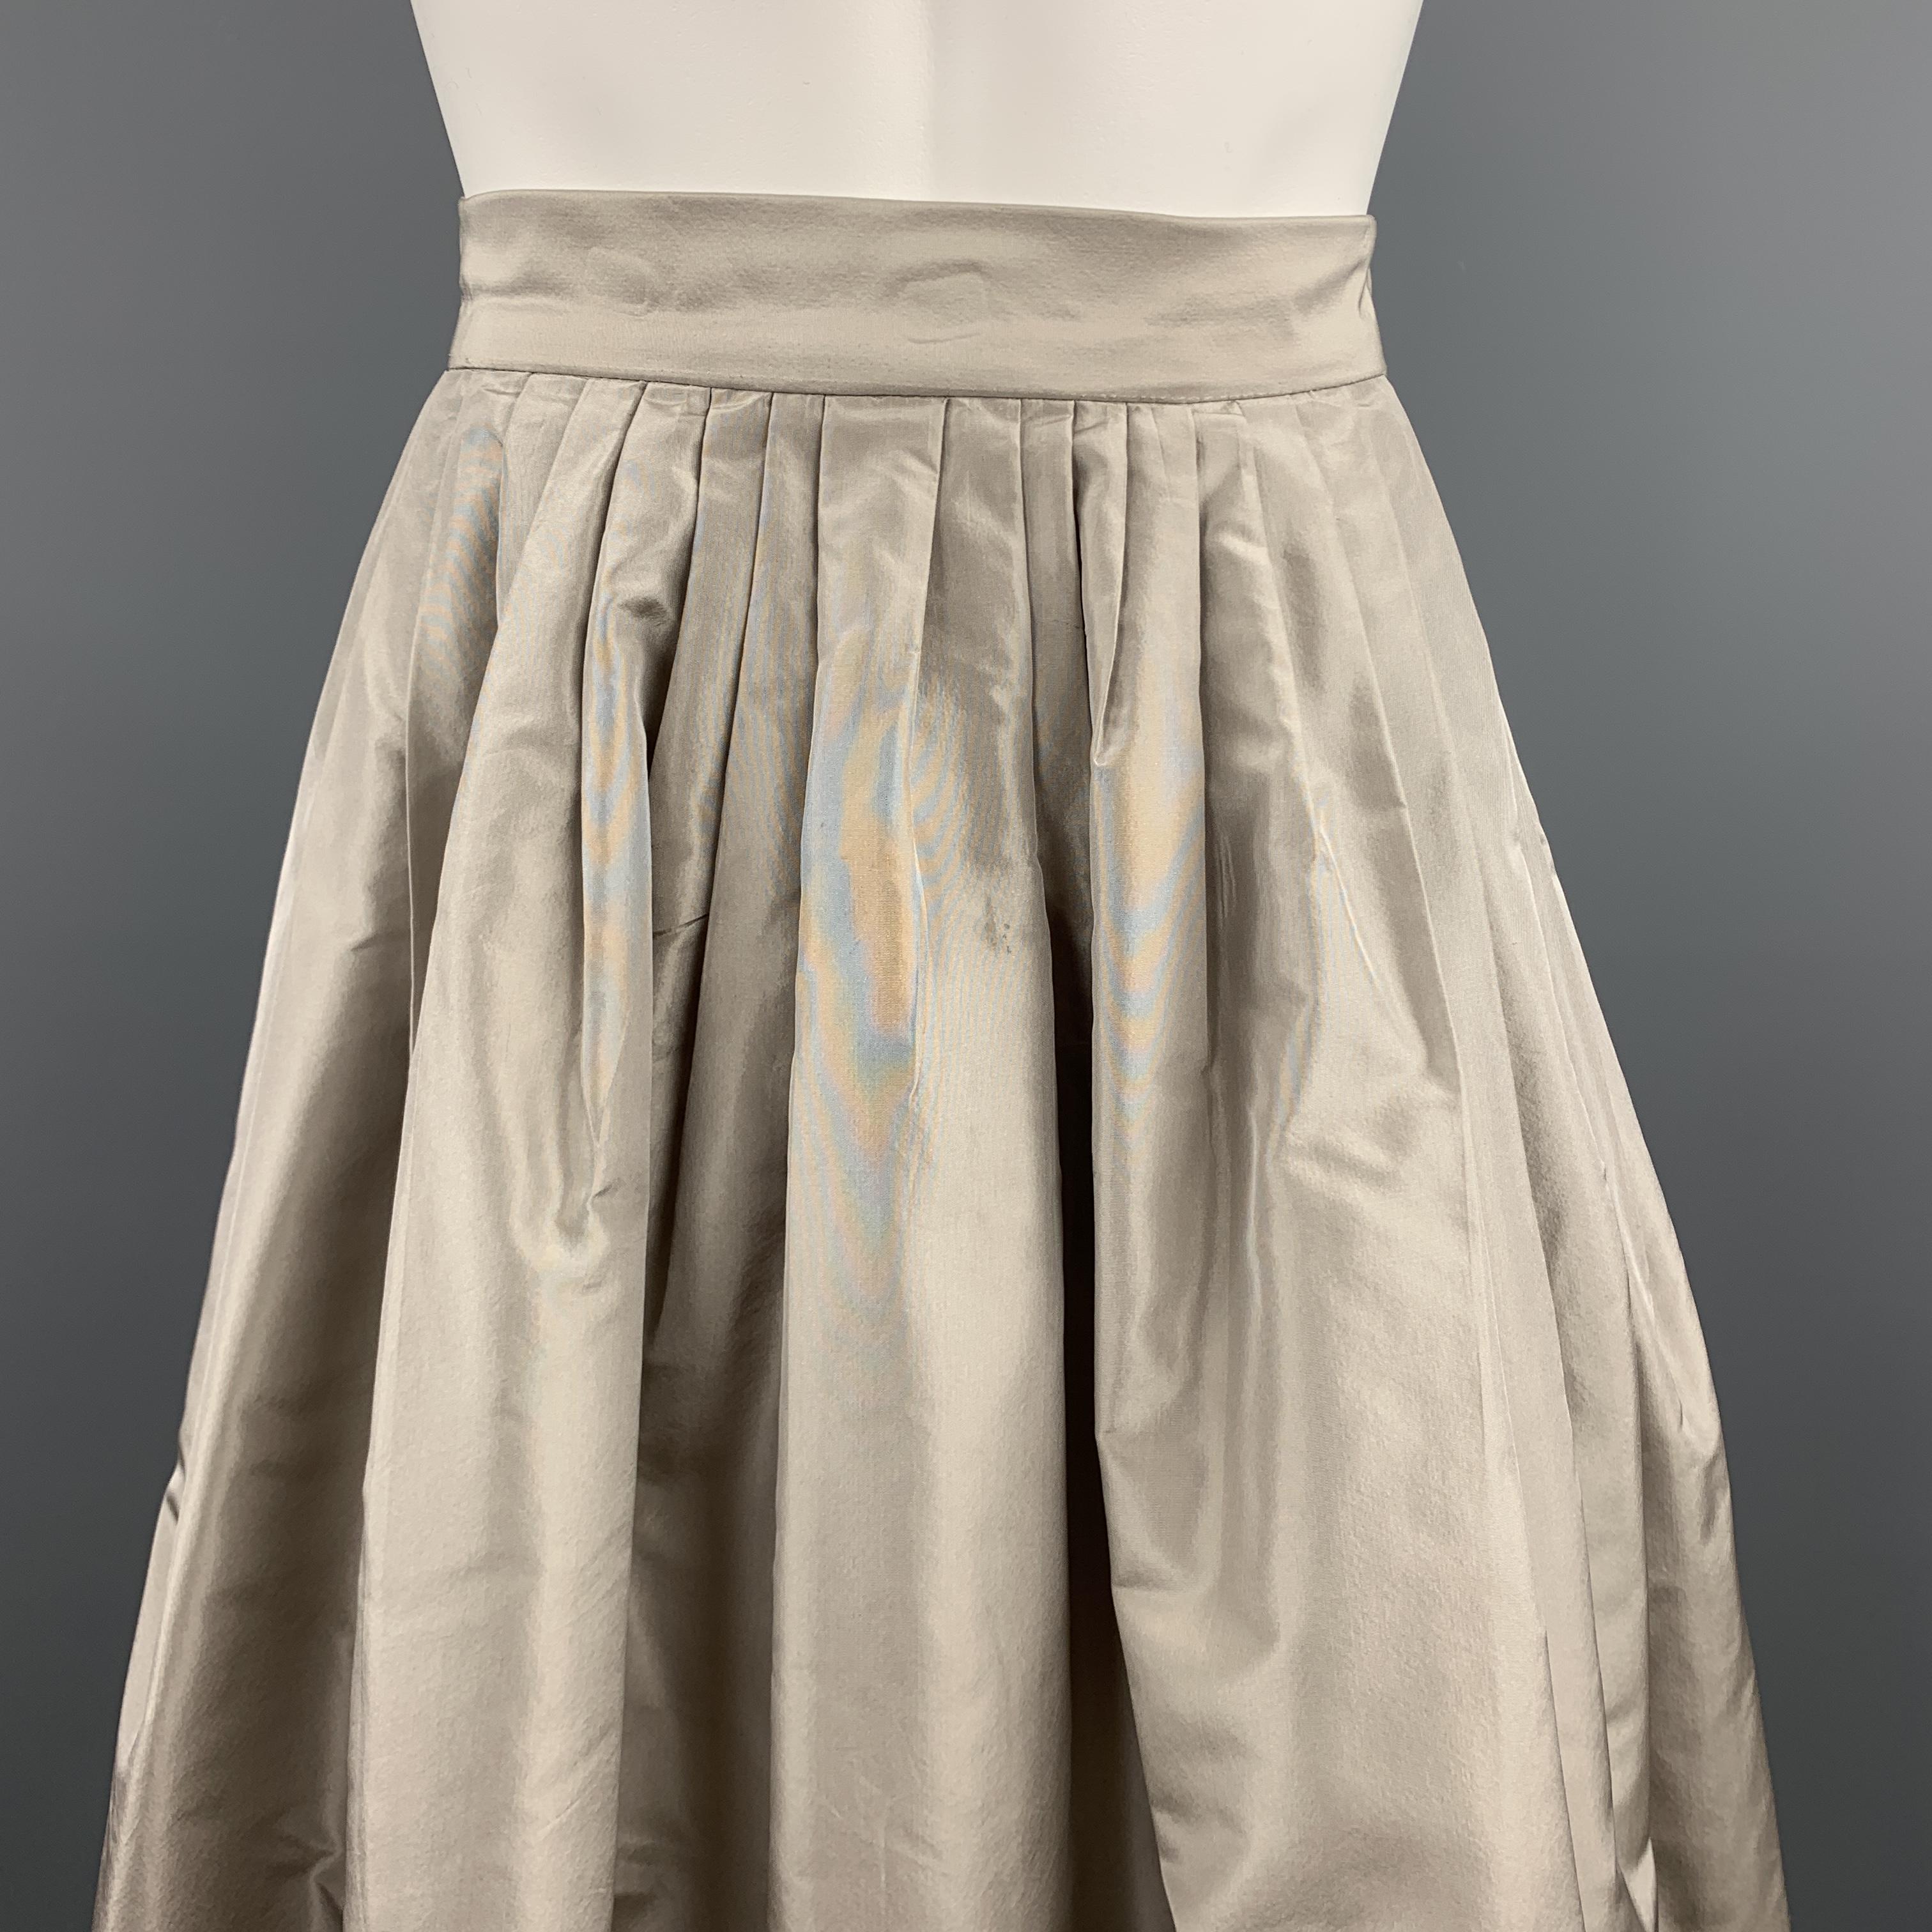 OSCAR DE LA RENTA Spring 2012 ball skirt comes in taupe grey silk taffeta with a pleated A line silhouette. Spot on front. As-is. Made in USA.

Good Pre-Owned Condition.
Marked: US 6

Measurements:

Waist: 28 in.
Hip: 60 in.
Length: 36 in.